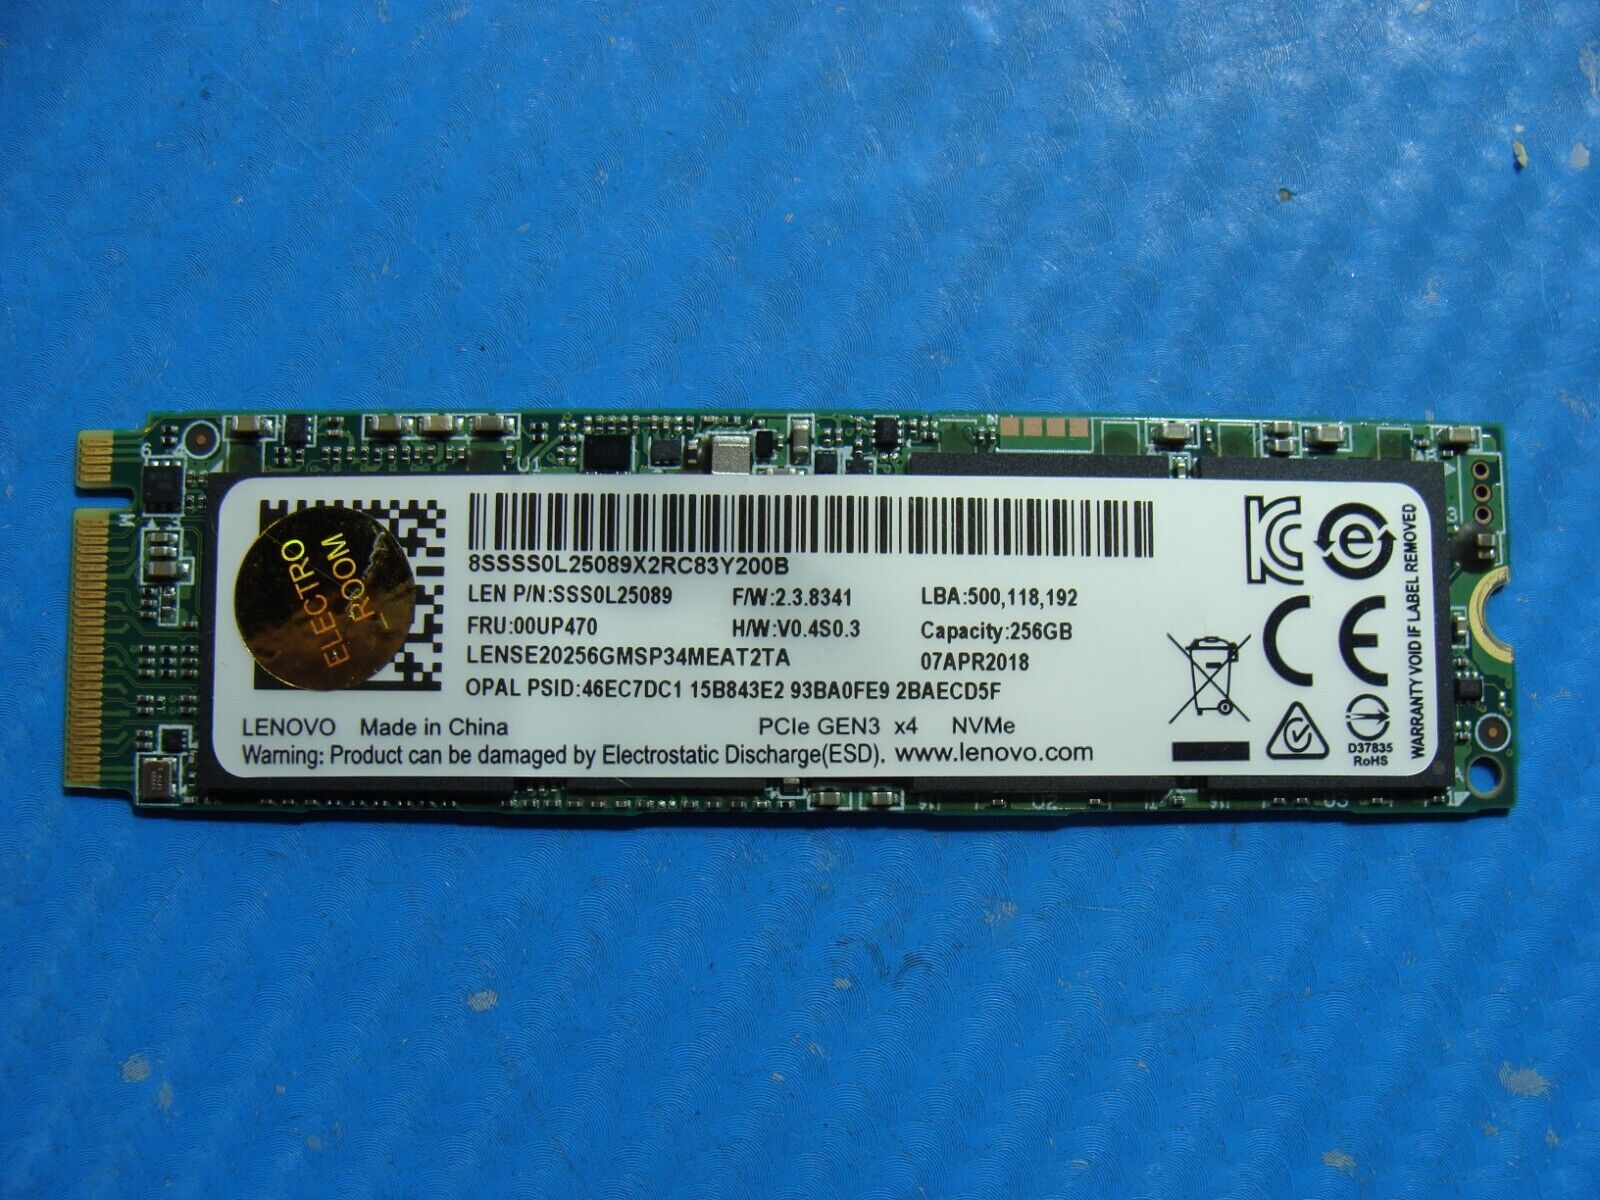 Lenovo Yoga 370 256GB NVMe M.2 SSD Solid State Drive 00UP470 SSS0L25089